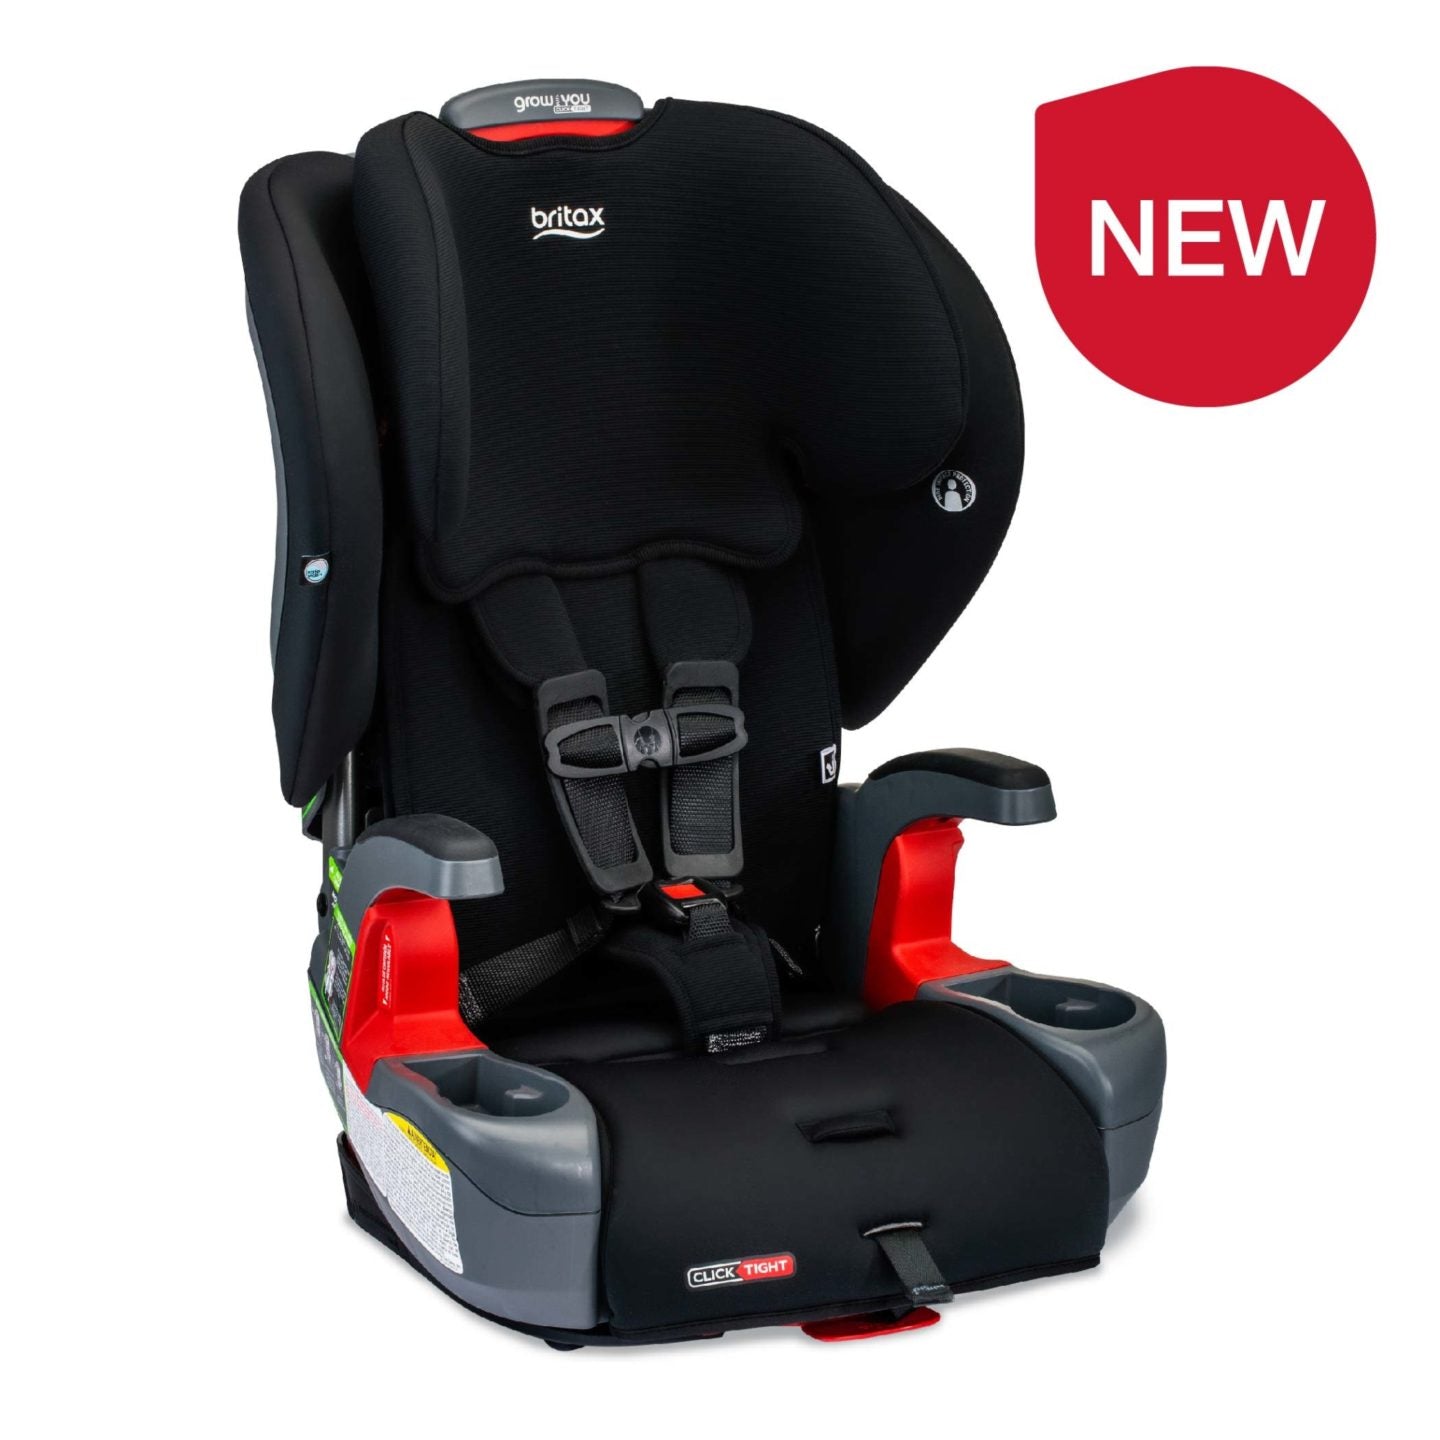 BRITAX Grow With You Harness-to-Booster Car Seat with ClickTight - ANB Baby -652182741327$300 - $500